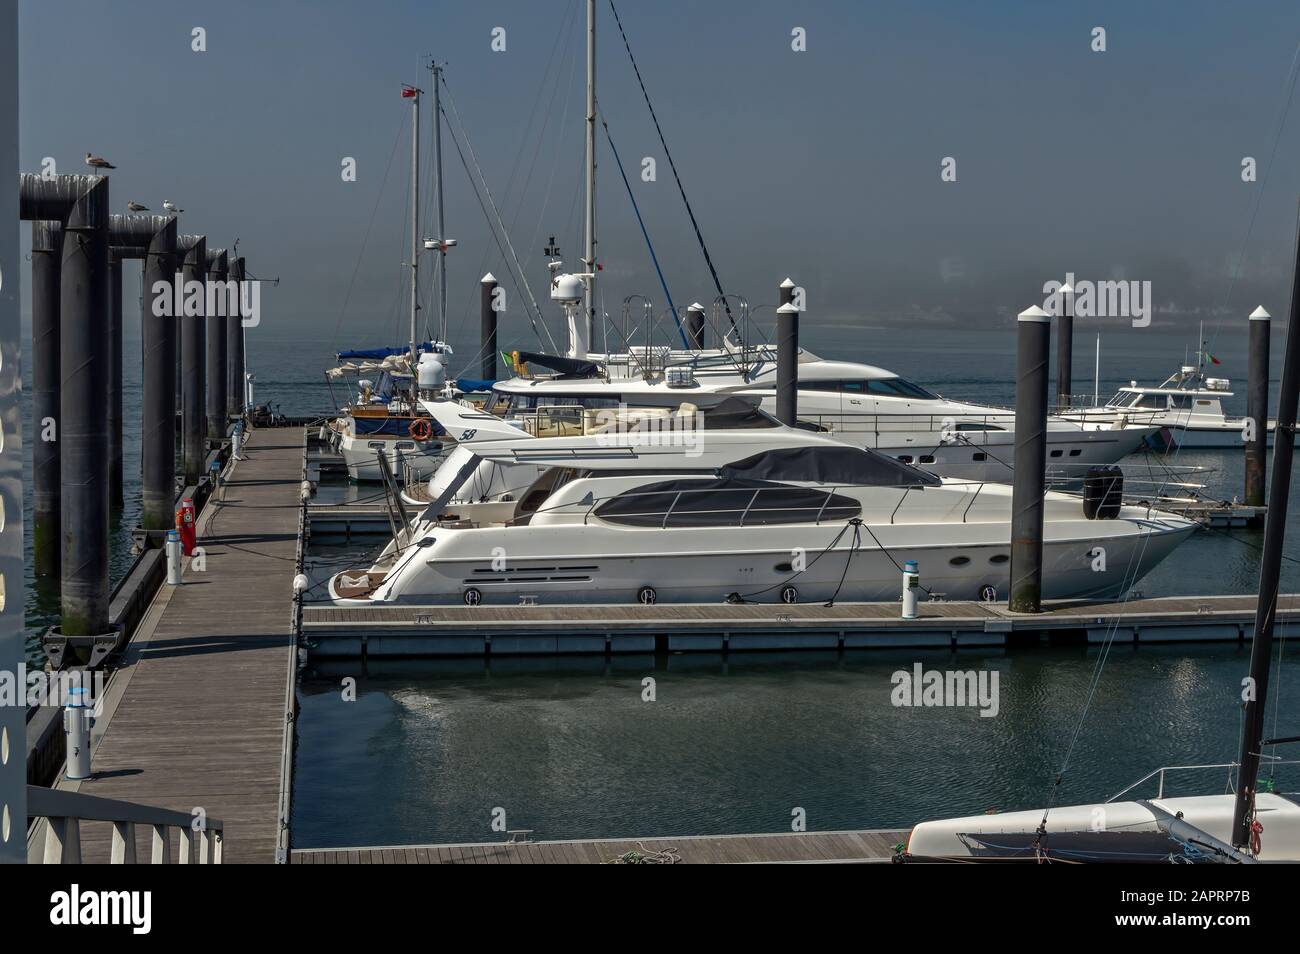 Pleasure boats parked in the marina in Afurada in the city of V. N. Gaia, Portugal. Stock Photo